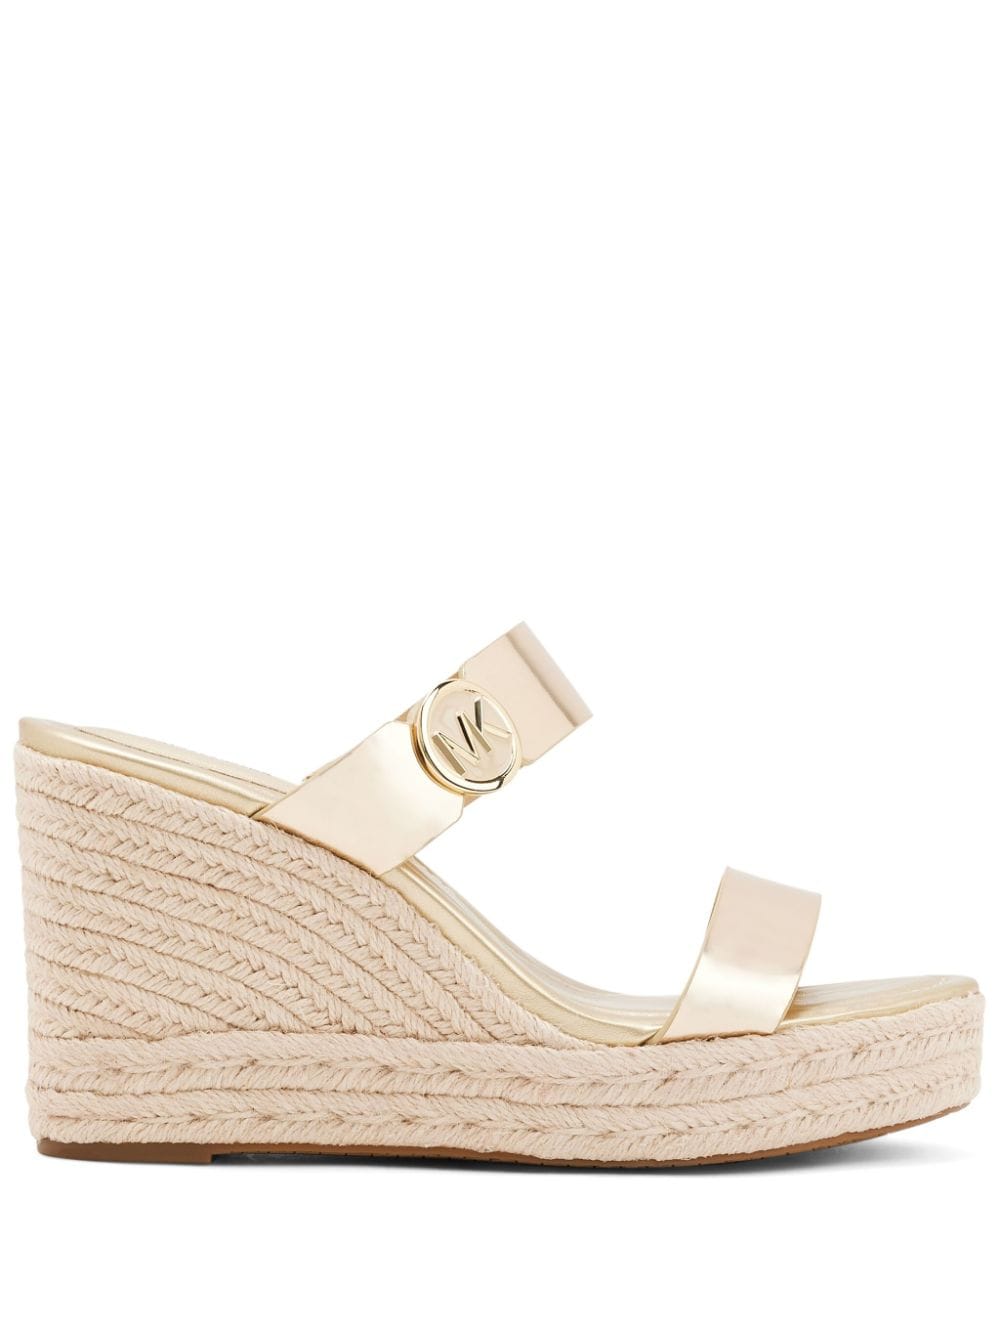 Michael Kors Lucinda Leather Wedge Sandals In Neutral